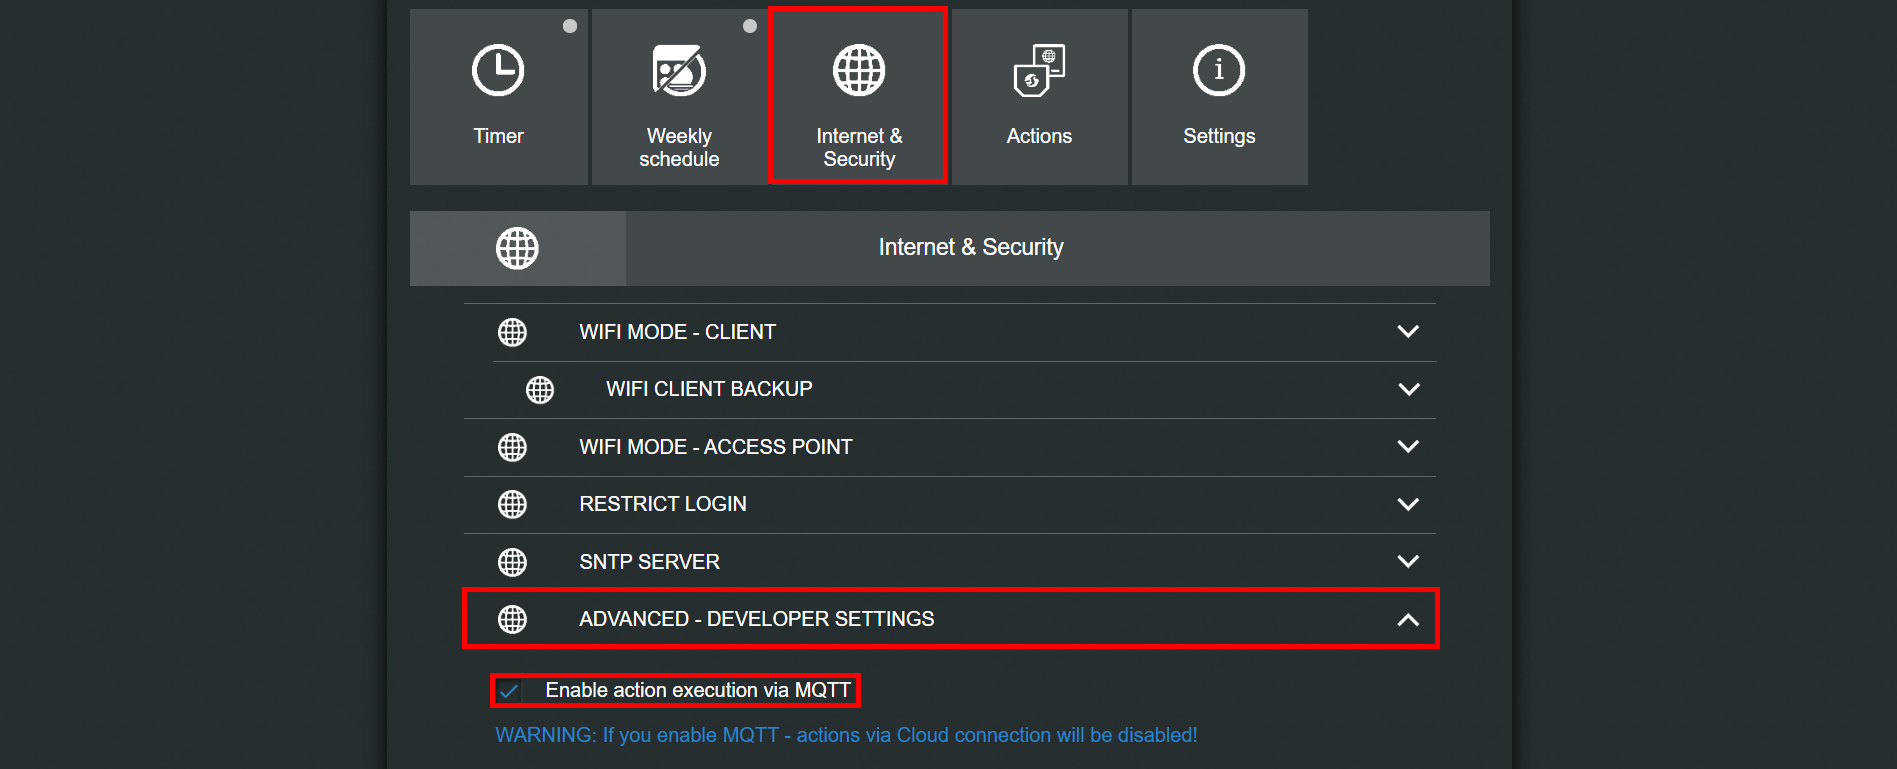 How to enable the internet security settings